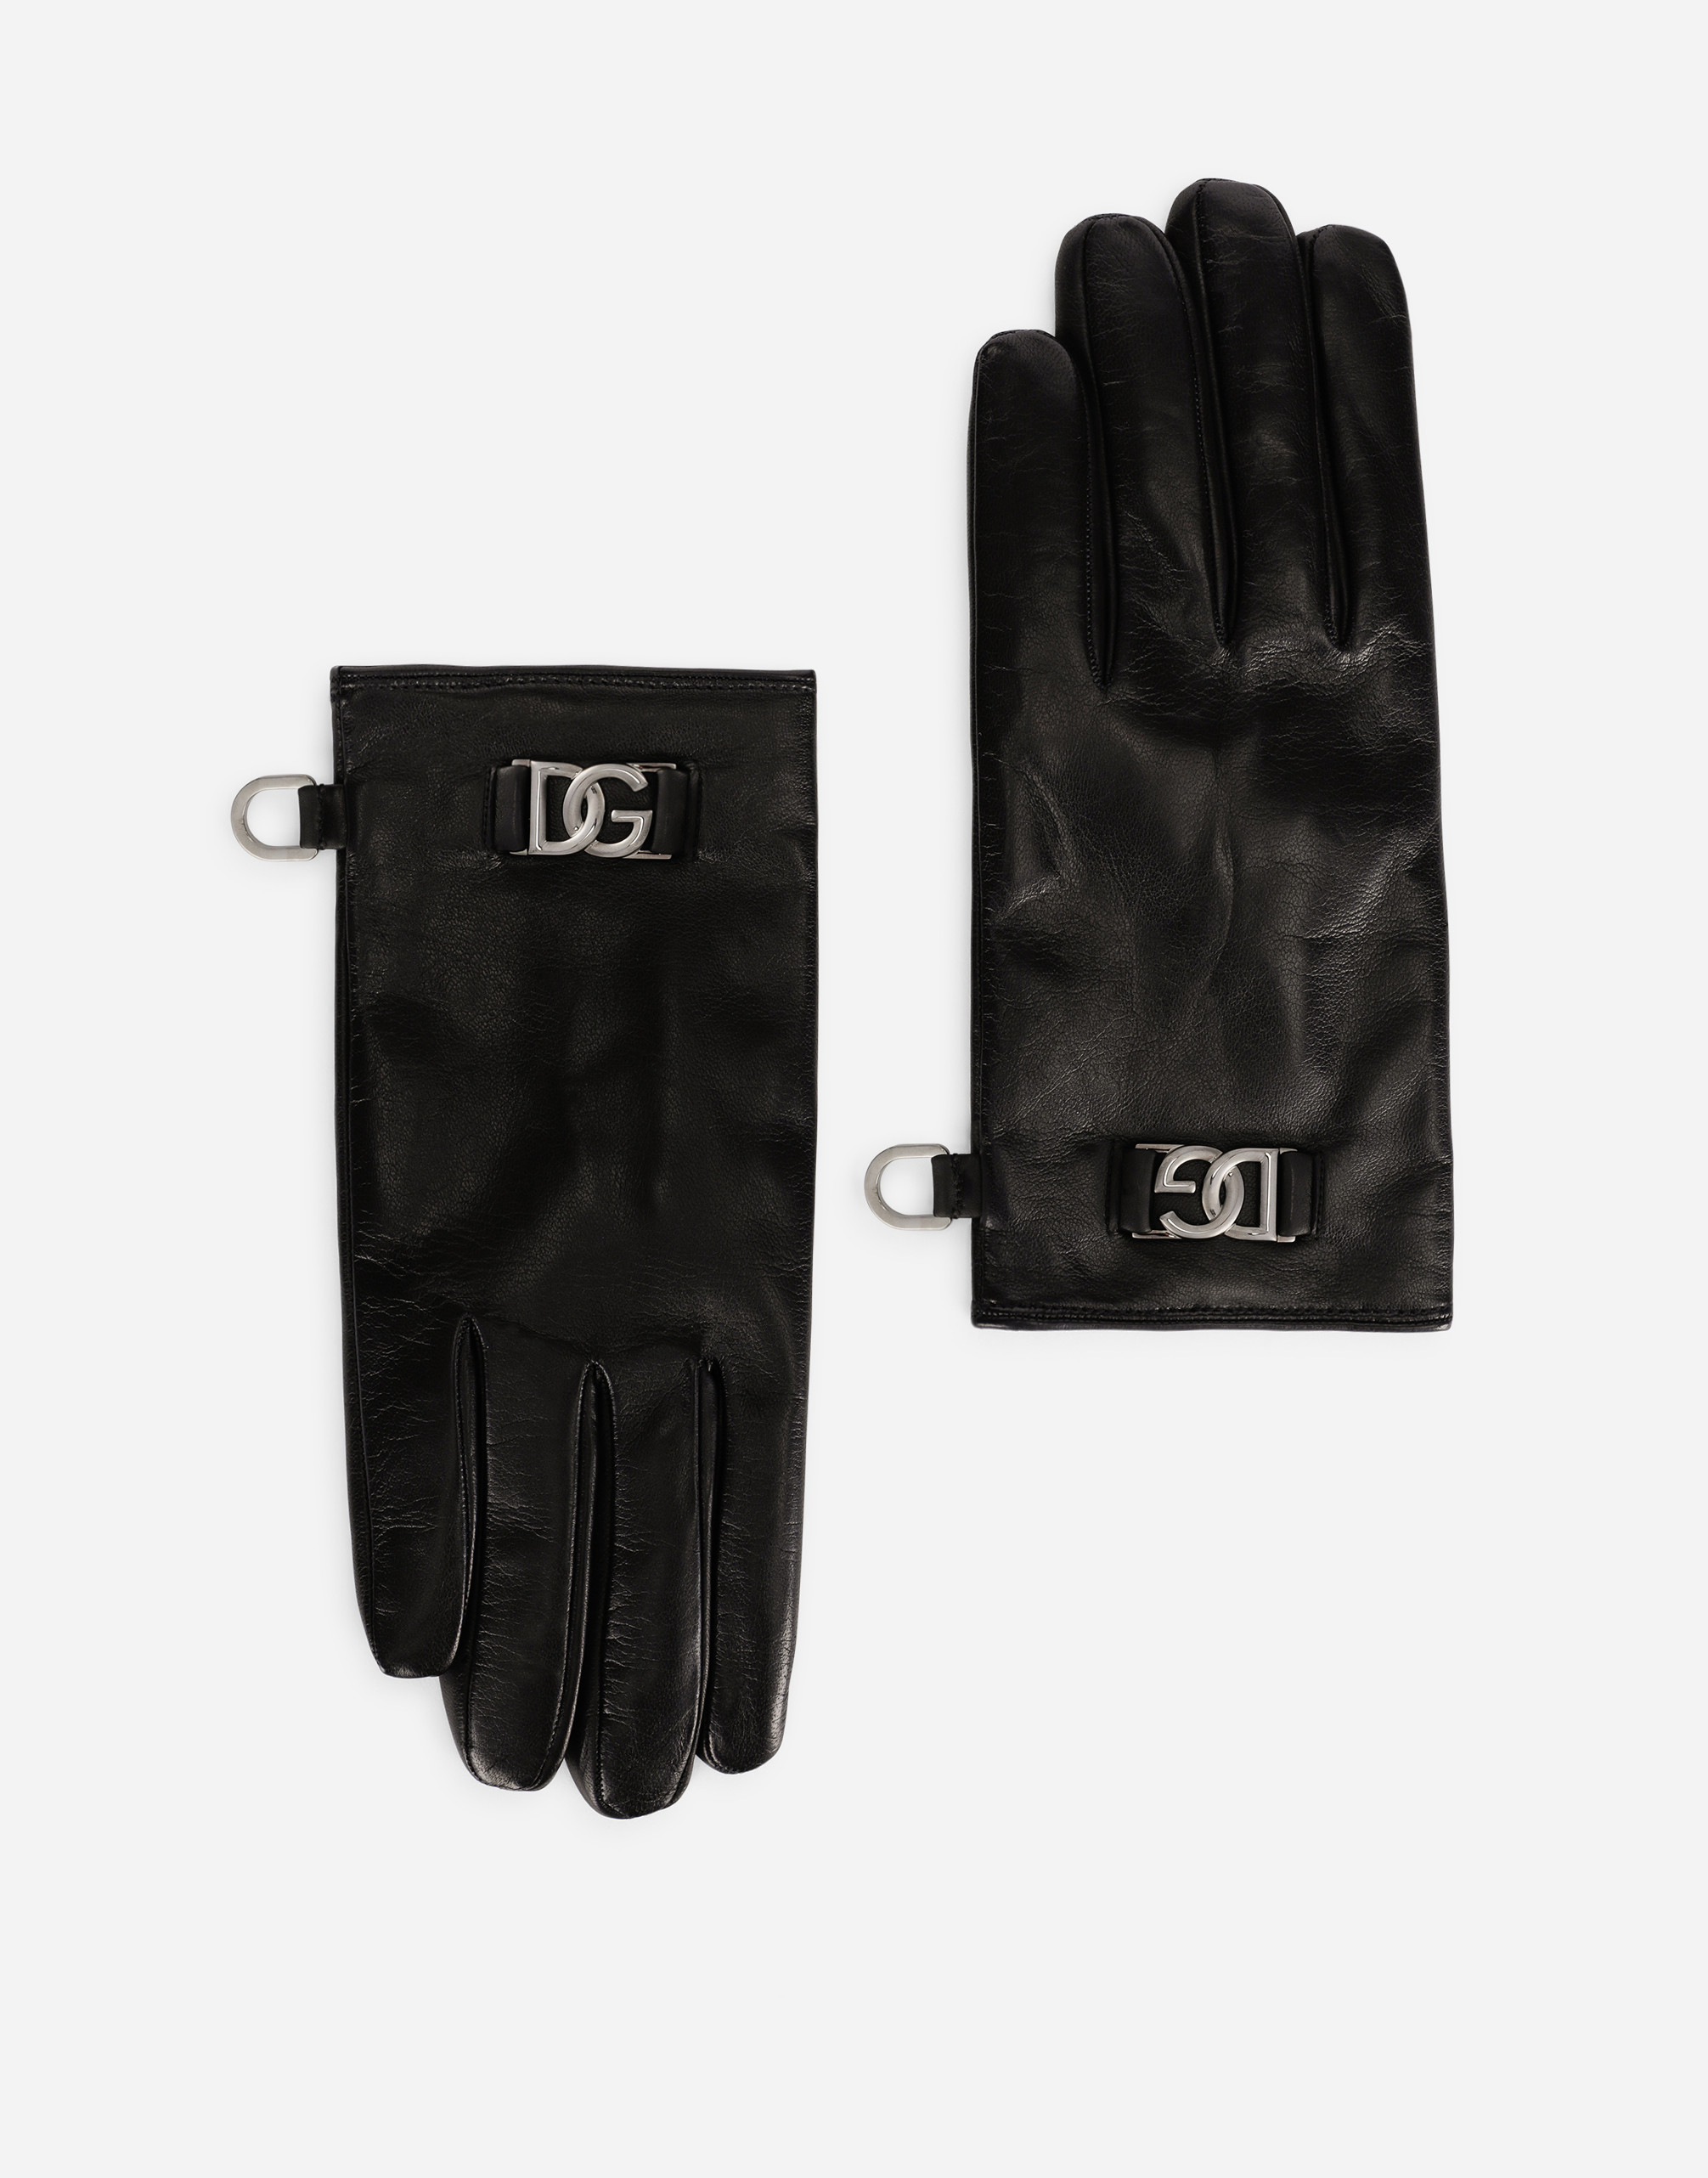 Nappa leather gloves with DG logo in Multicolor